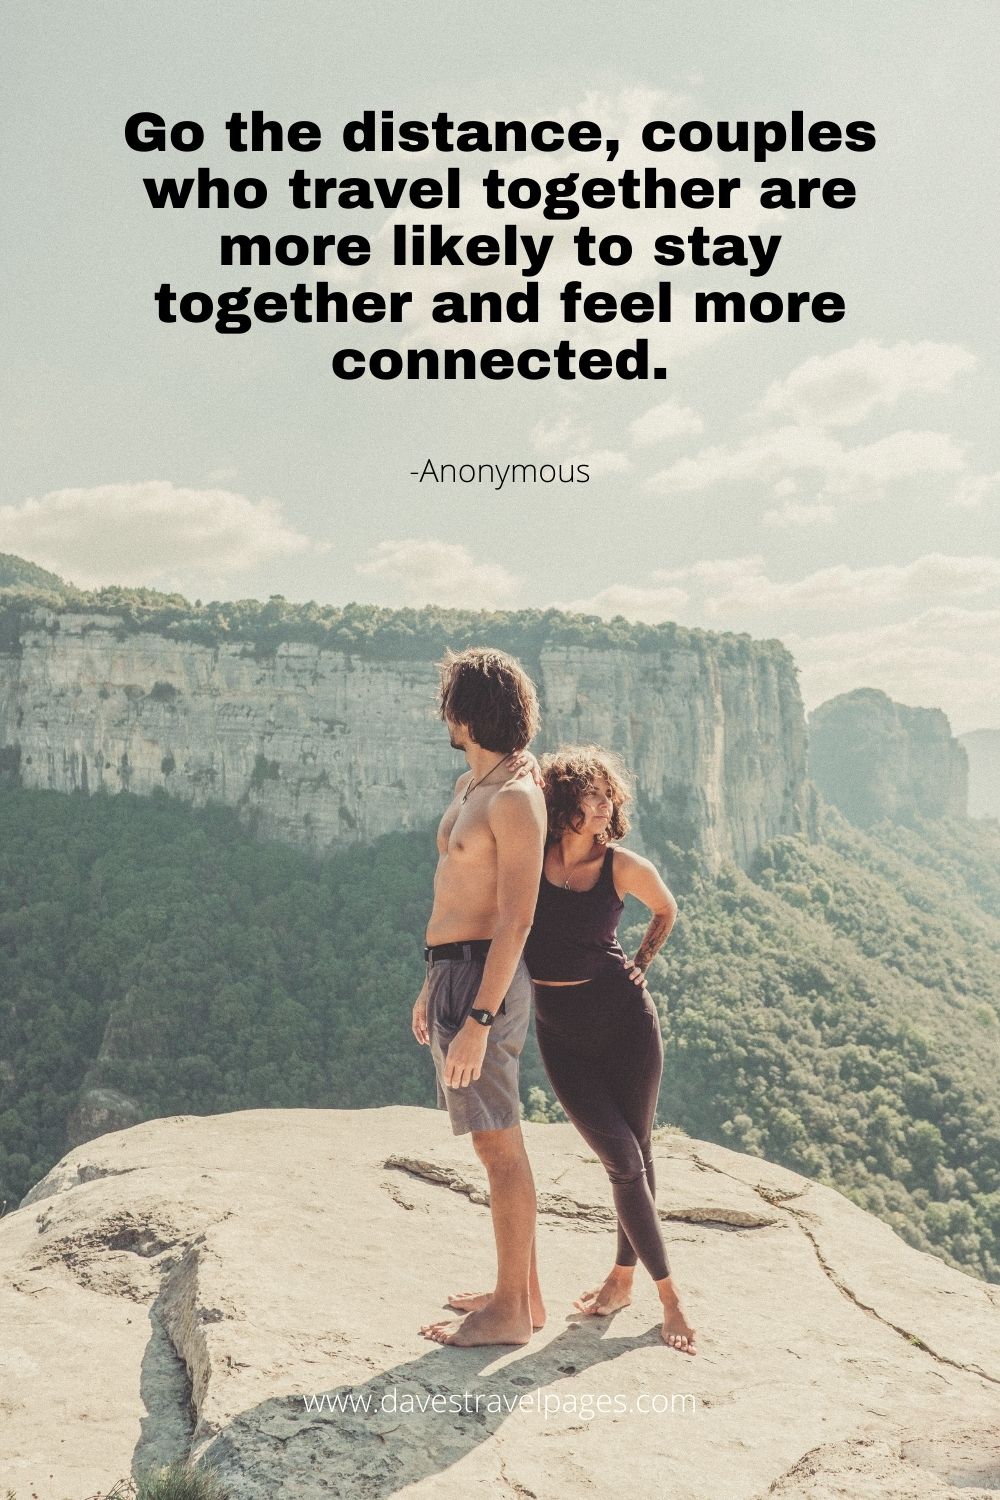 Couple Travel Together Quote: Go the distance, couples who travel together are more likely to stay together and feel more connected.